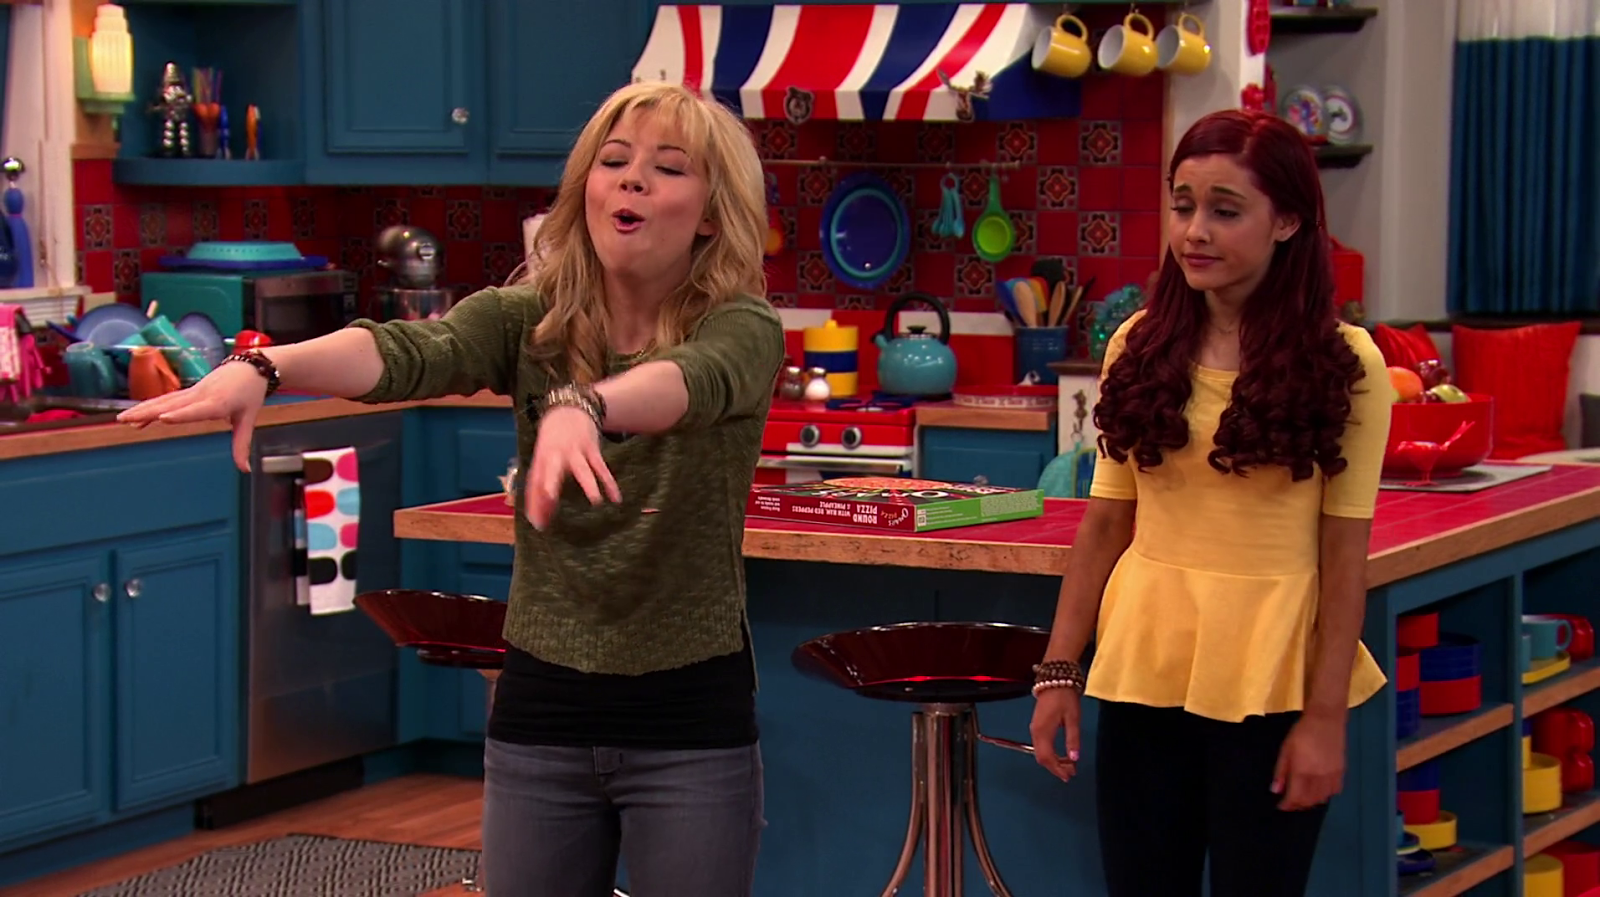 These are the screen shots from this weeks episode of Sam & Cat, "...